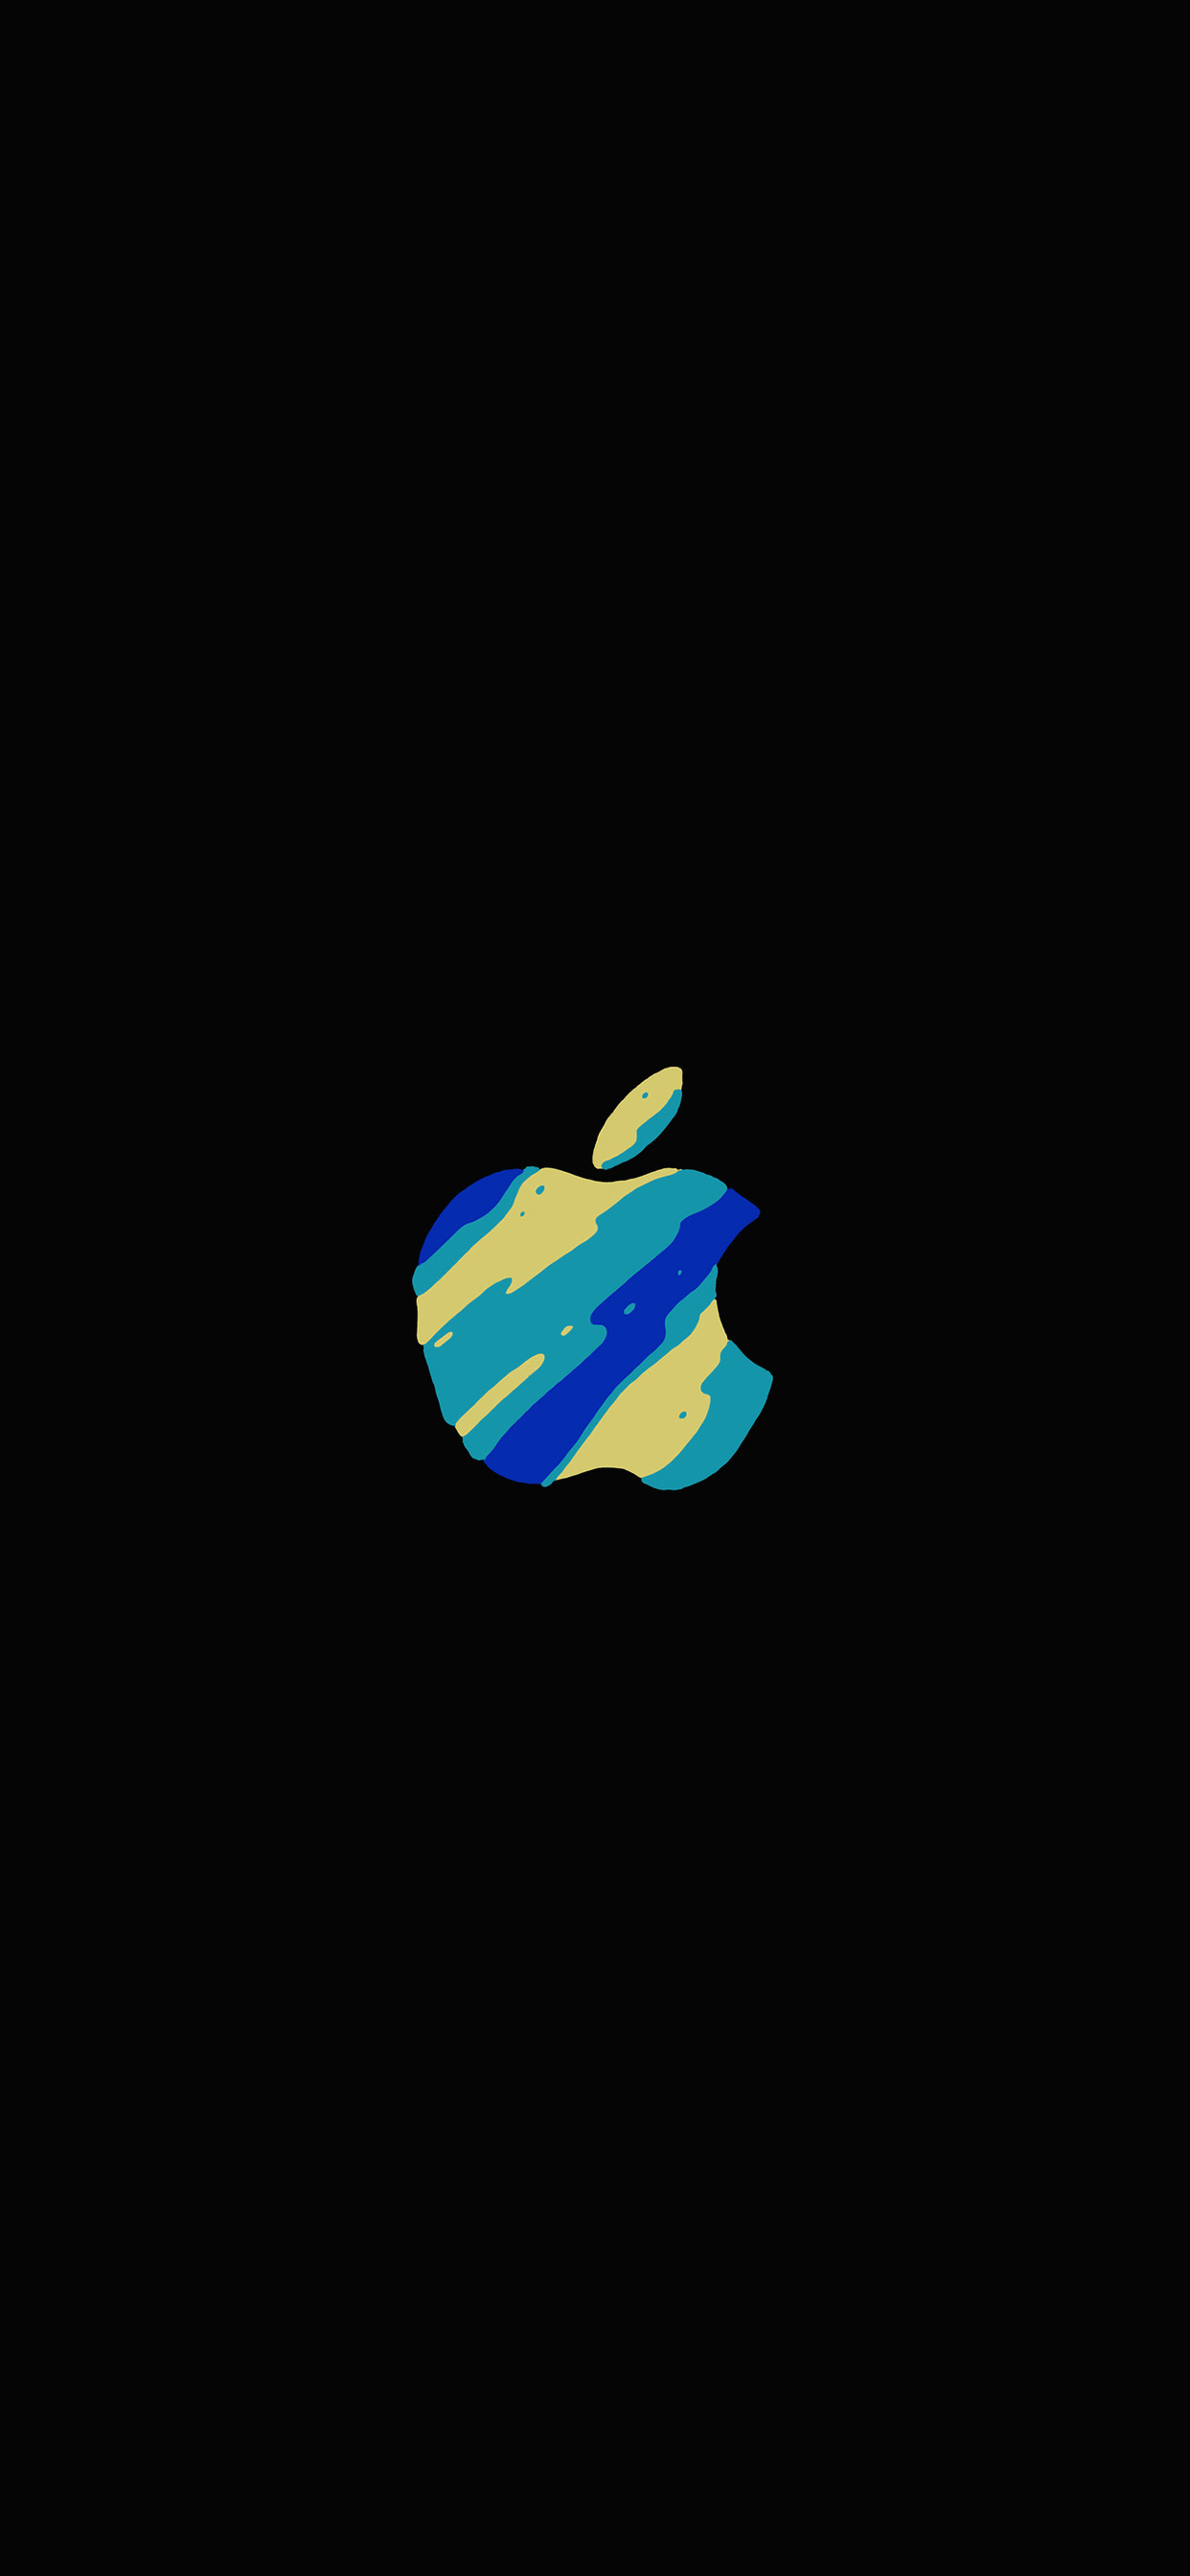 Apple logo Wallpaper for iPhone X, 6 Download